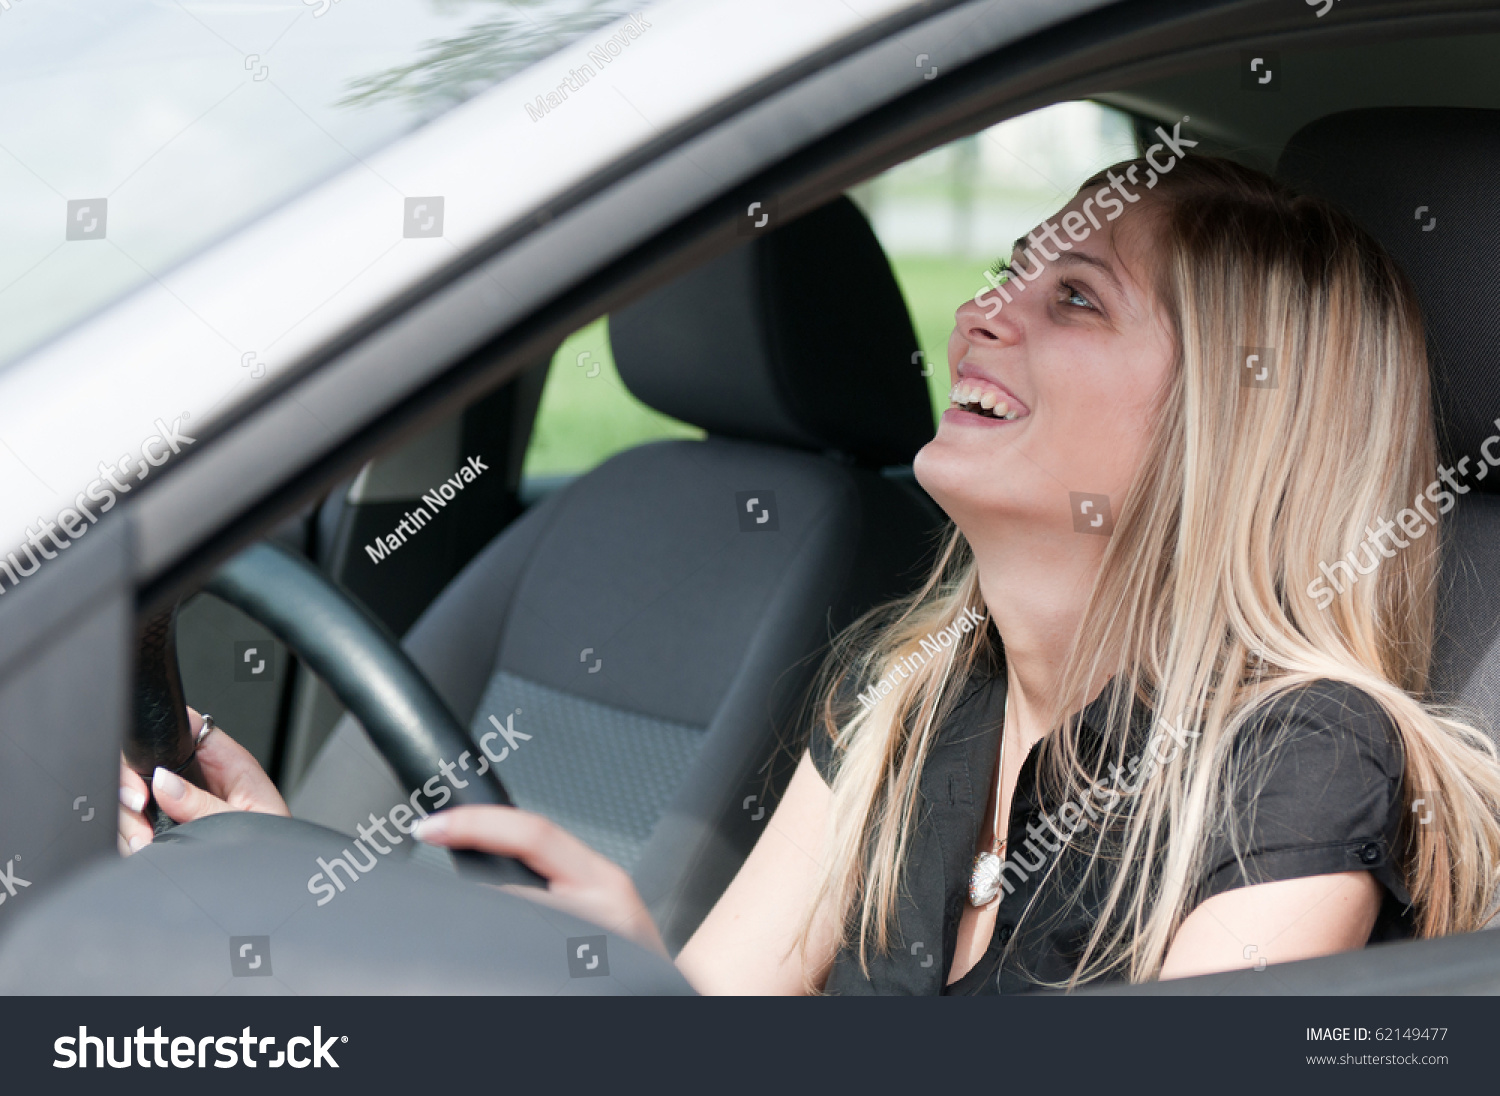 stock-photo-young-beautiful-laughing-woman-driving-car-portrait-through-side-window-62149477.jpg